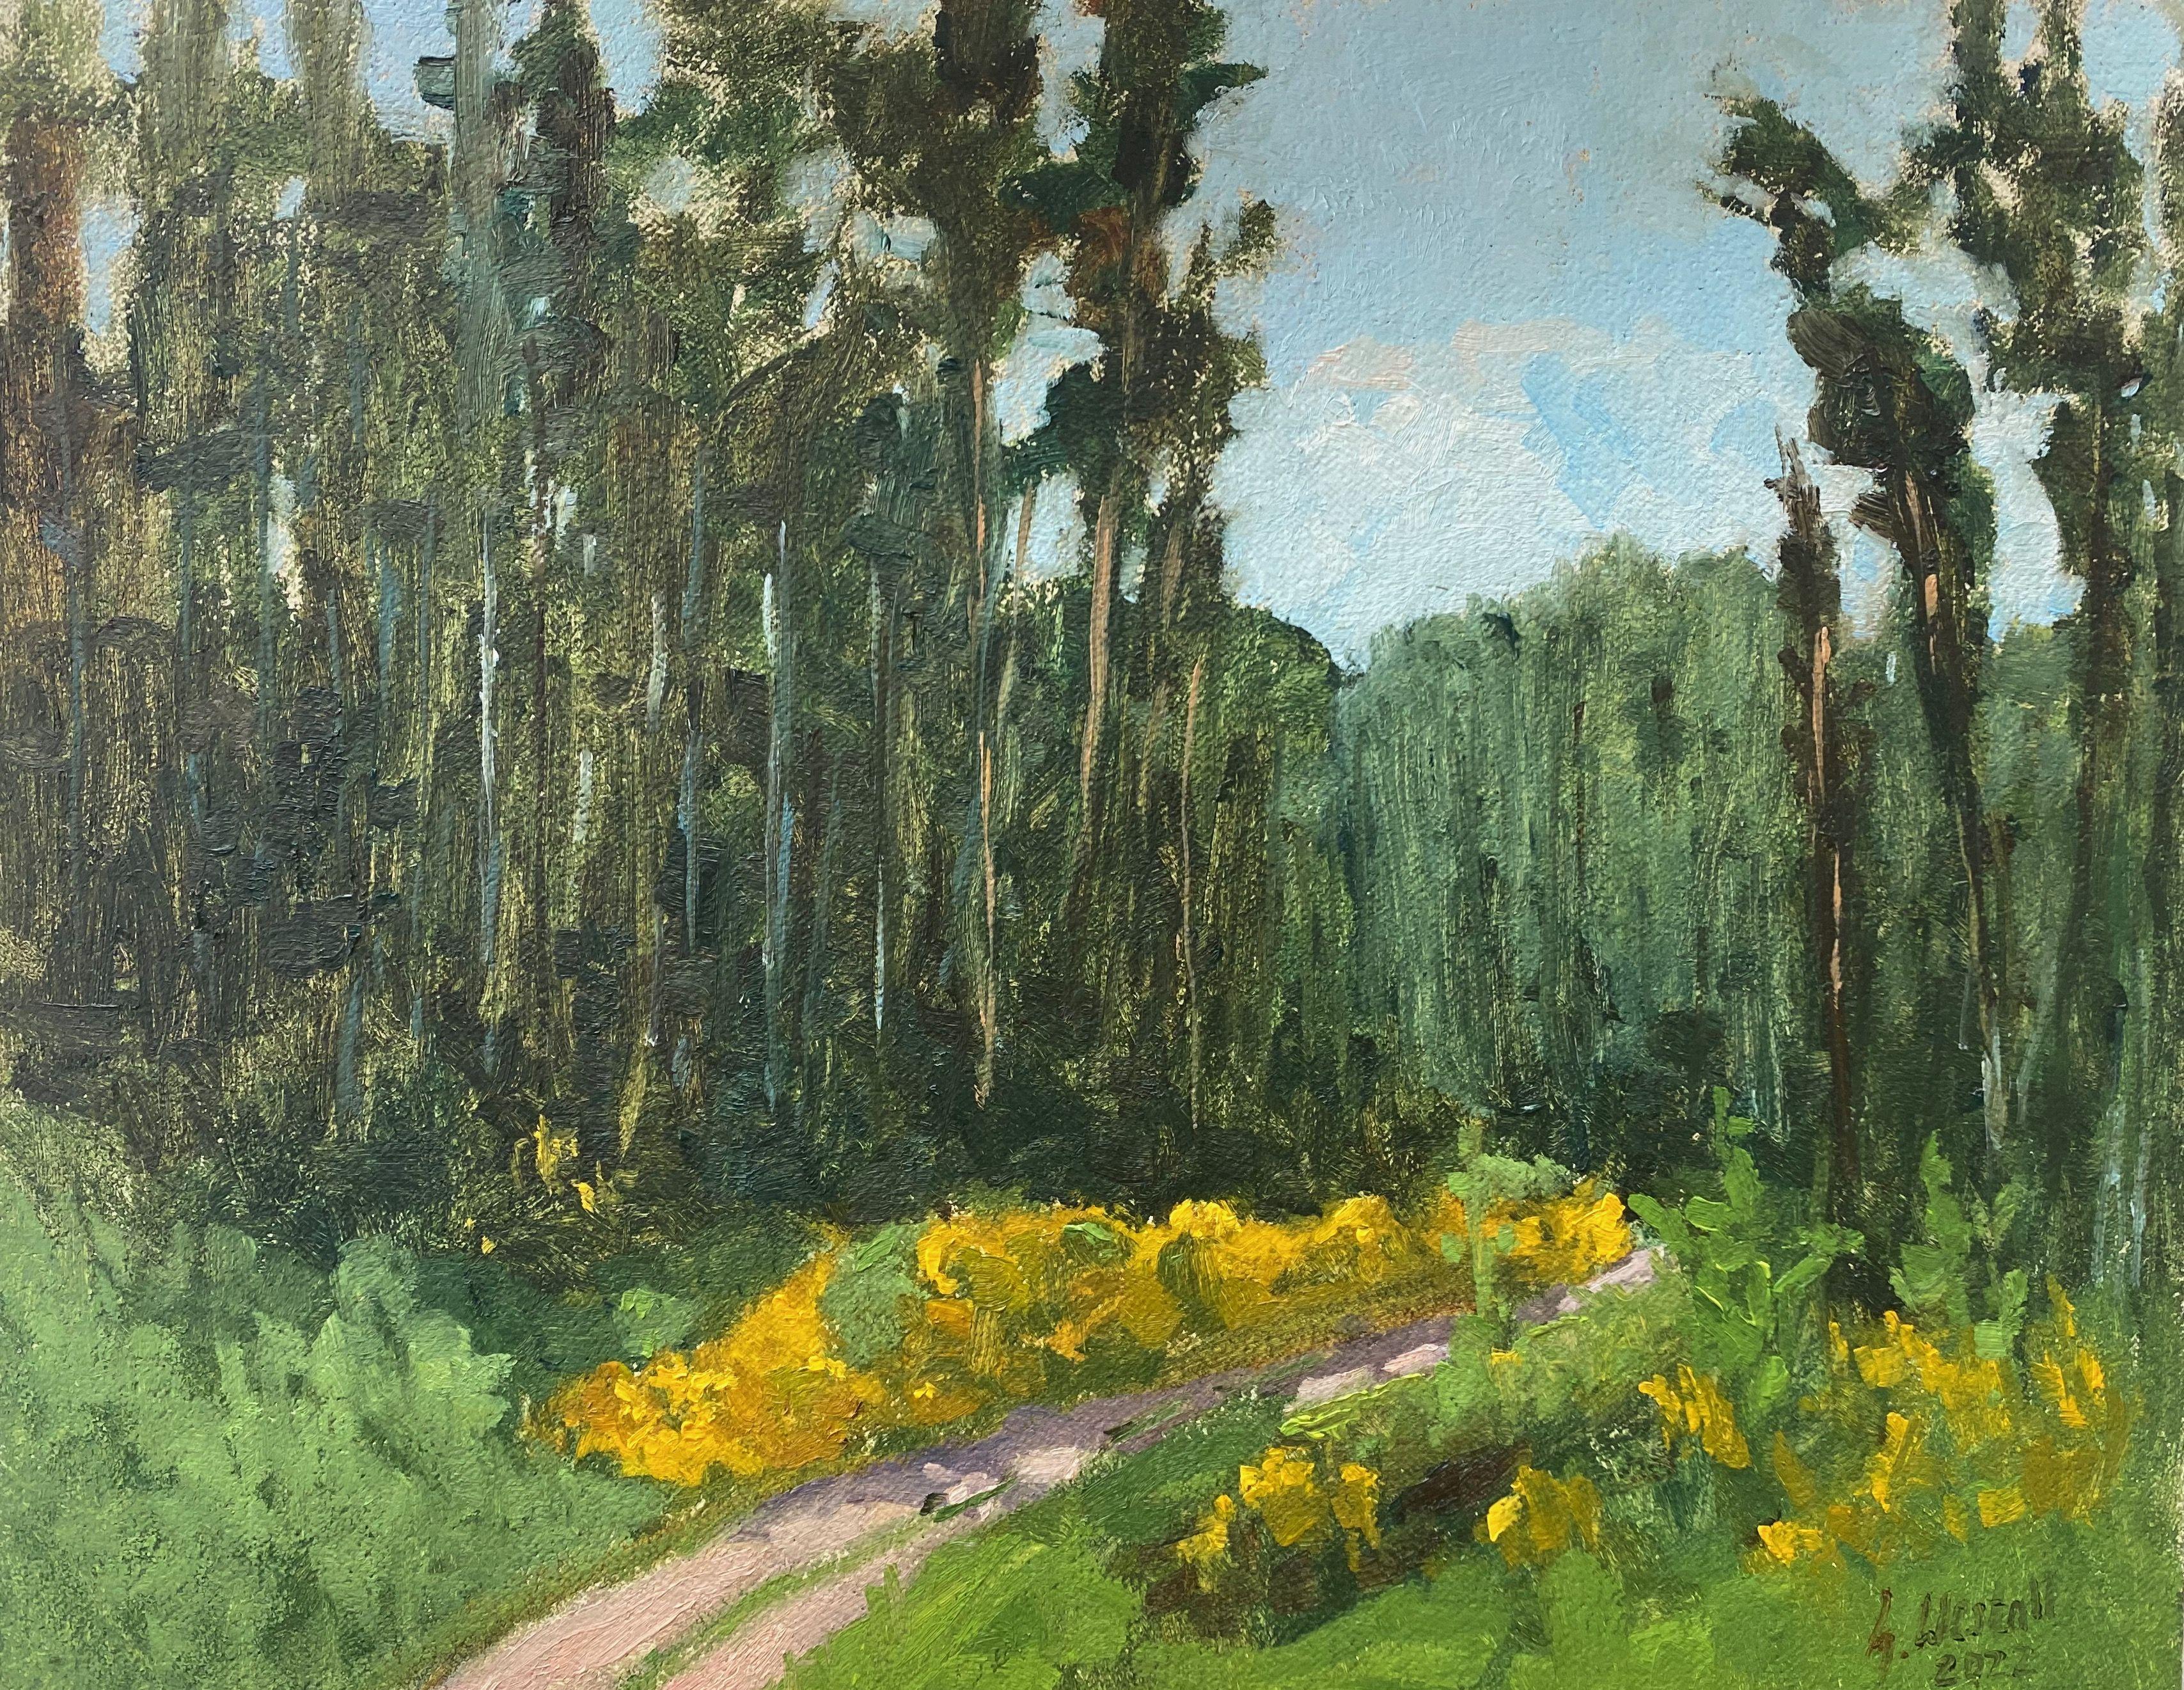 Plein air, Poland, 2022.  On the way back to my accommodation in Klopotowo, I saw this eye-catcher flowering gorse in the Forest afar.  Oil on linen laminated on HDF. :: Painting :: Realism :: This piece comes with an official certificate of